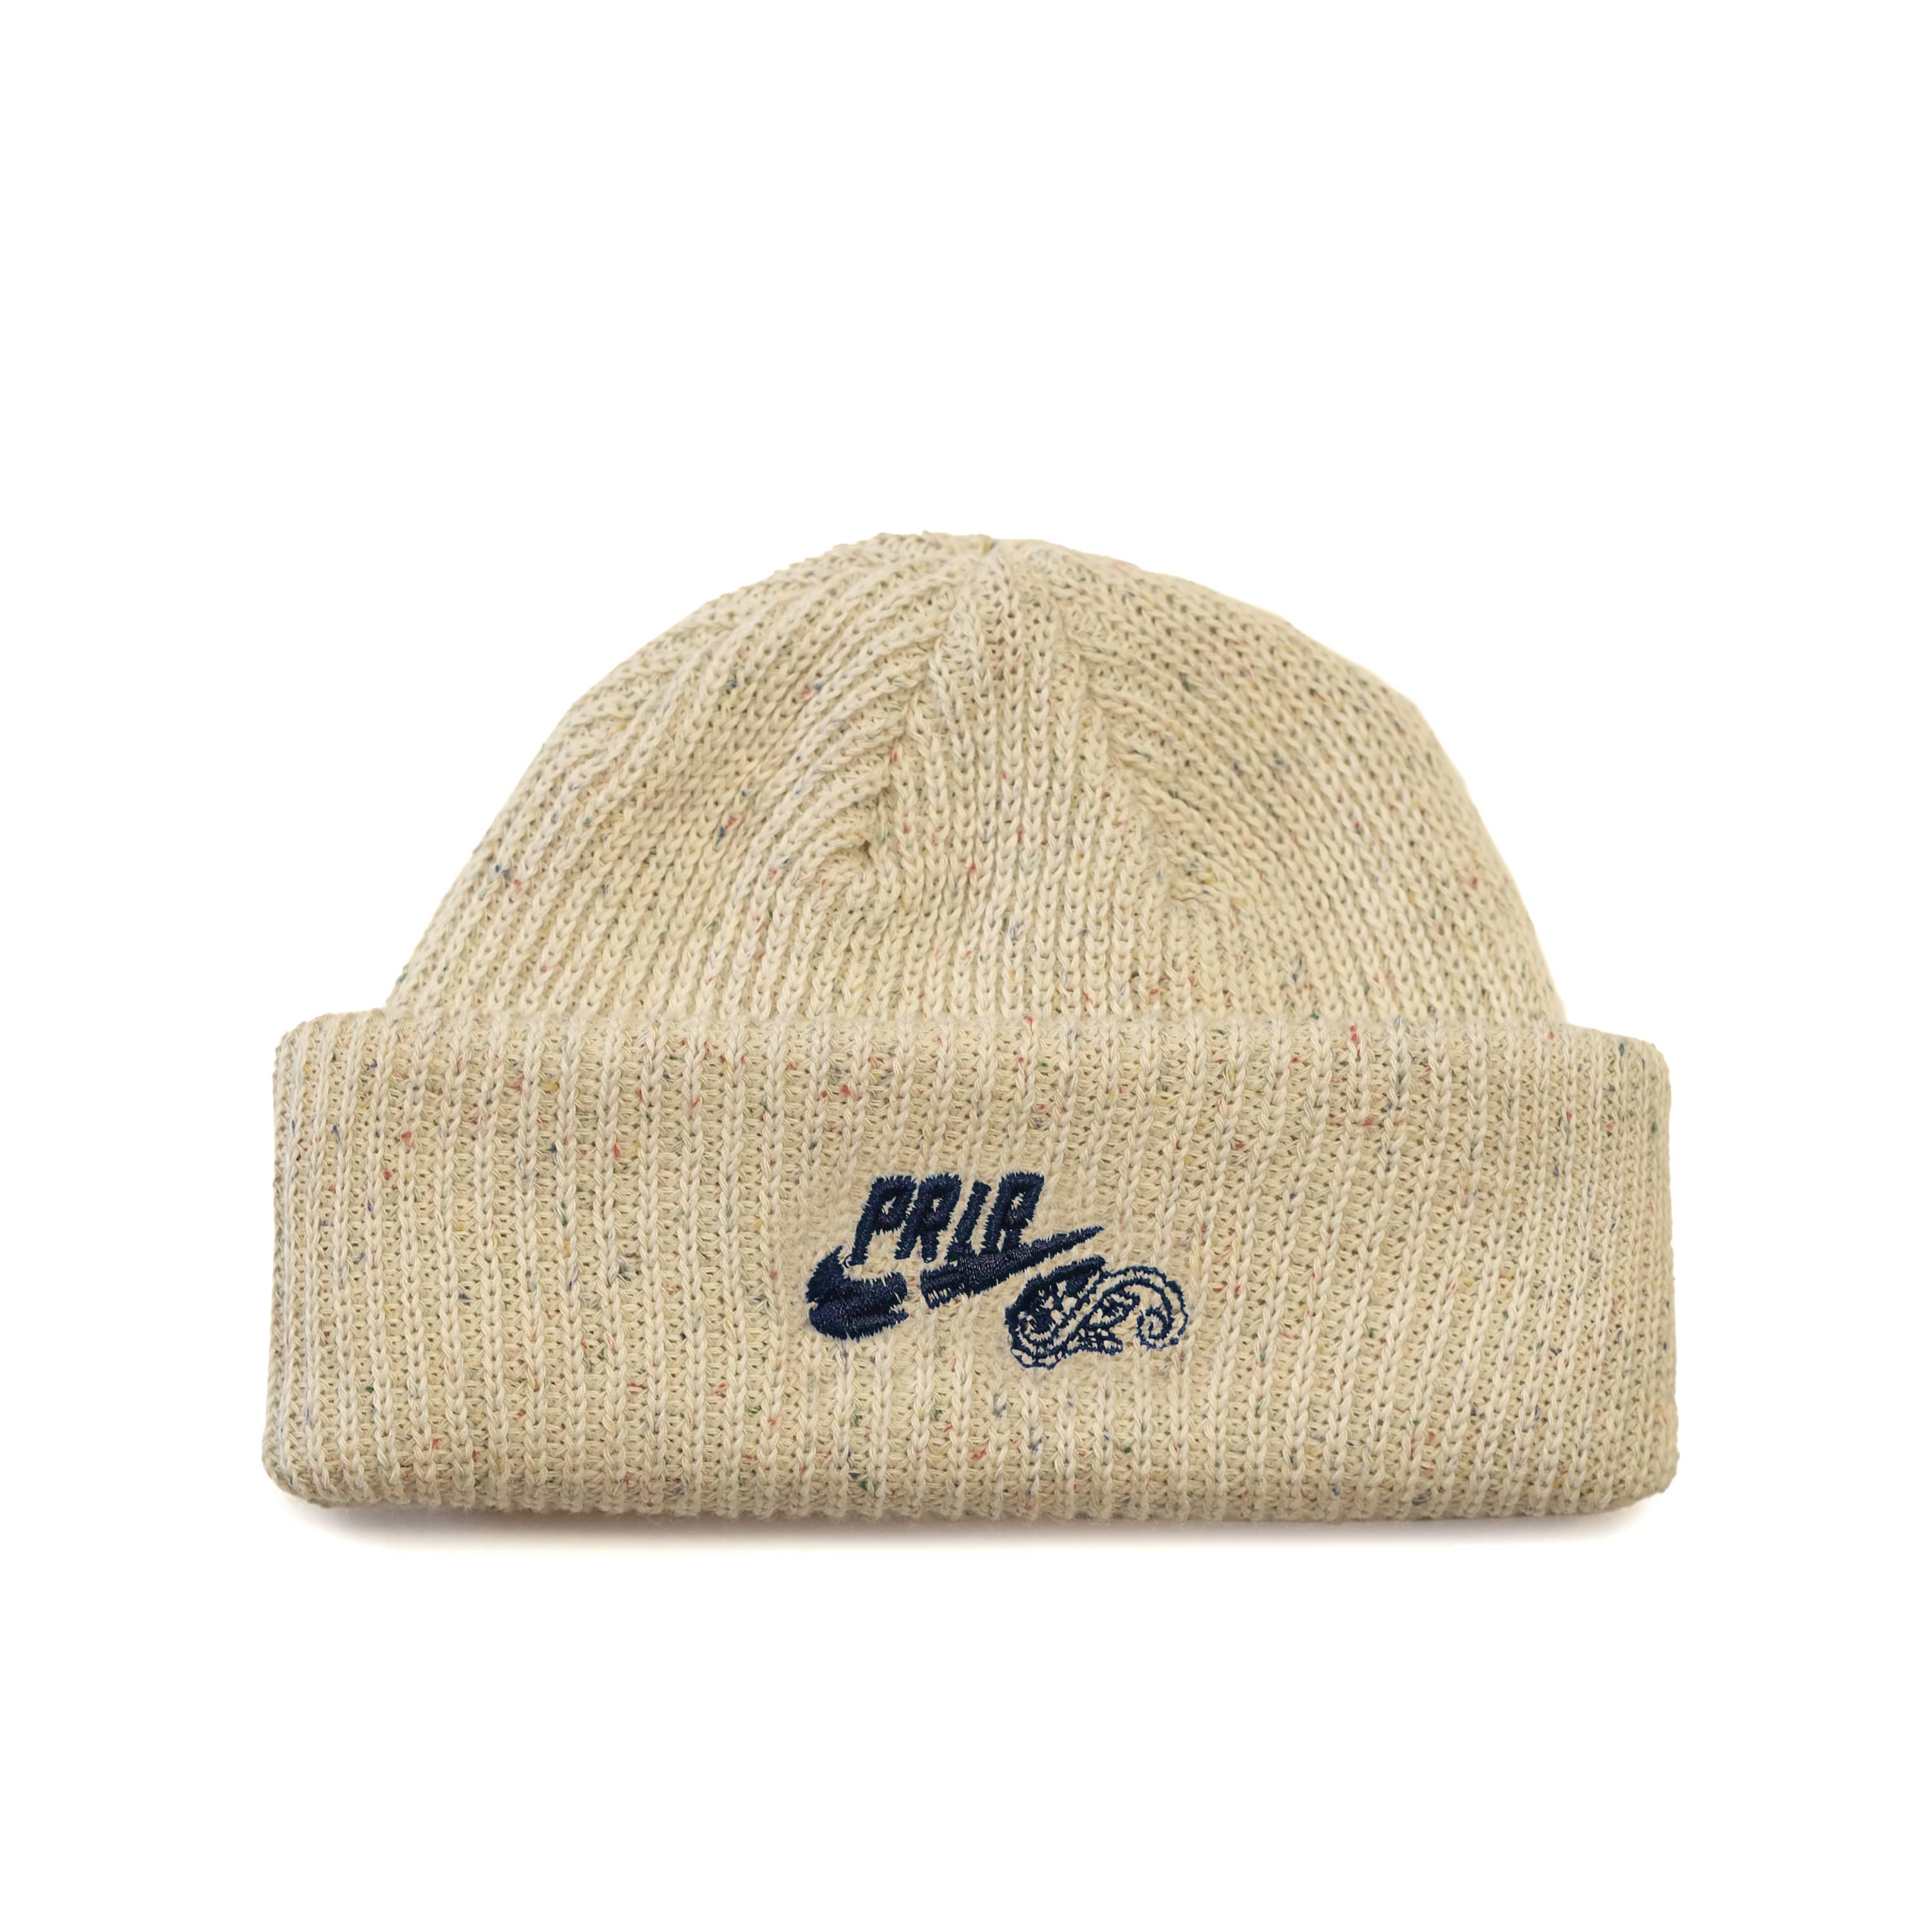 Parlor 23 "PRLR Swoosh" Toddler X Made In Canada Beanie